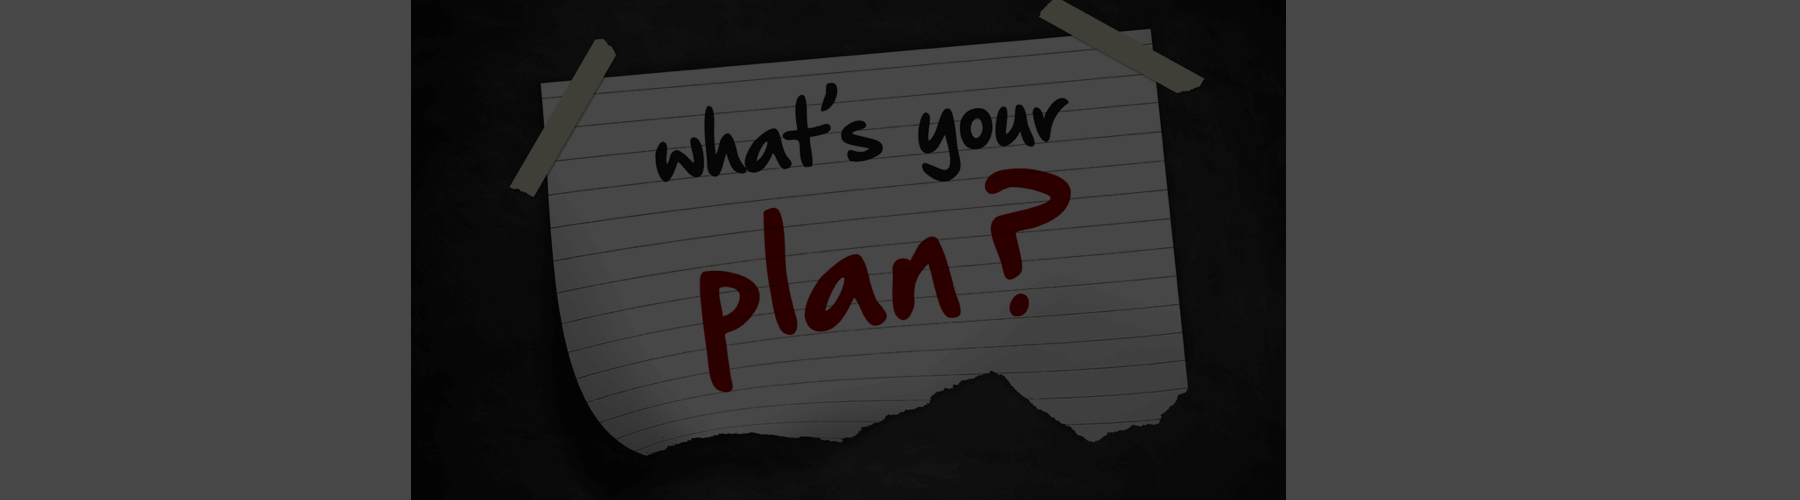 fail to plan plan to fail meaning